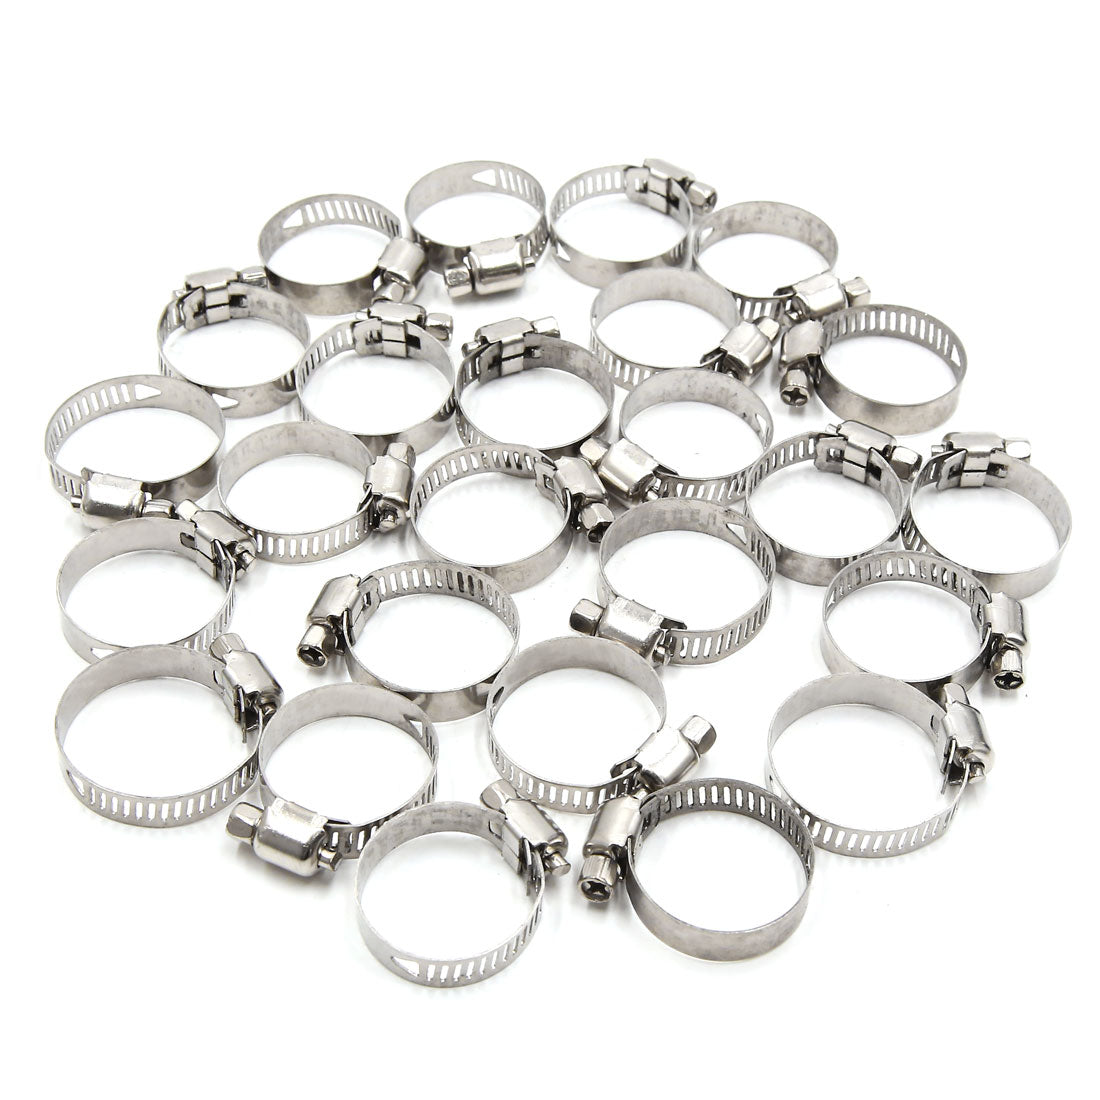 uxcell Uxcell 25pcs 16-25MM Stainless Steel Car Vehicle Drive Hose Clamp Fuel Line  Clip